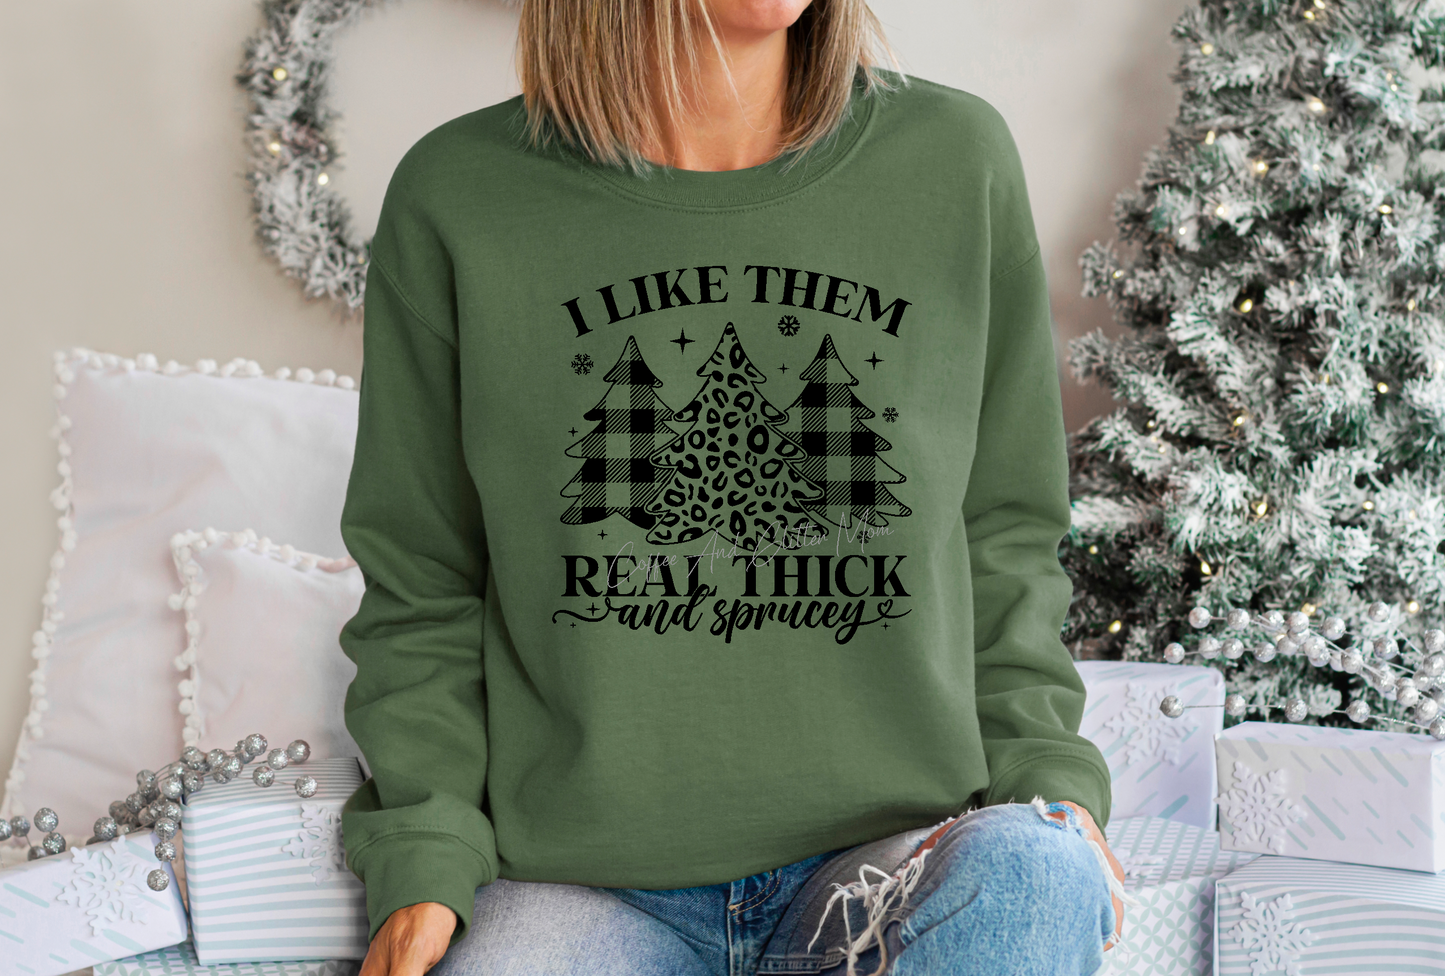 Real Thick & Sprucey Sweatshirt